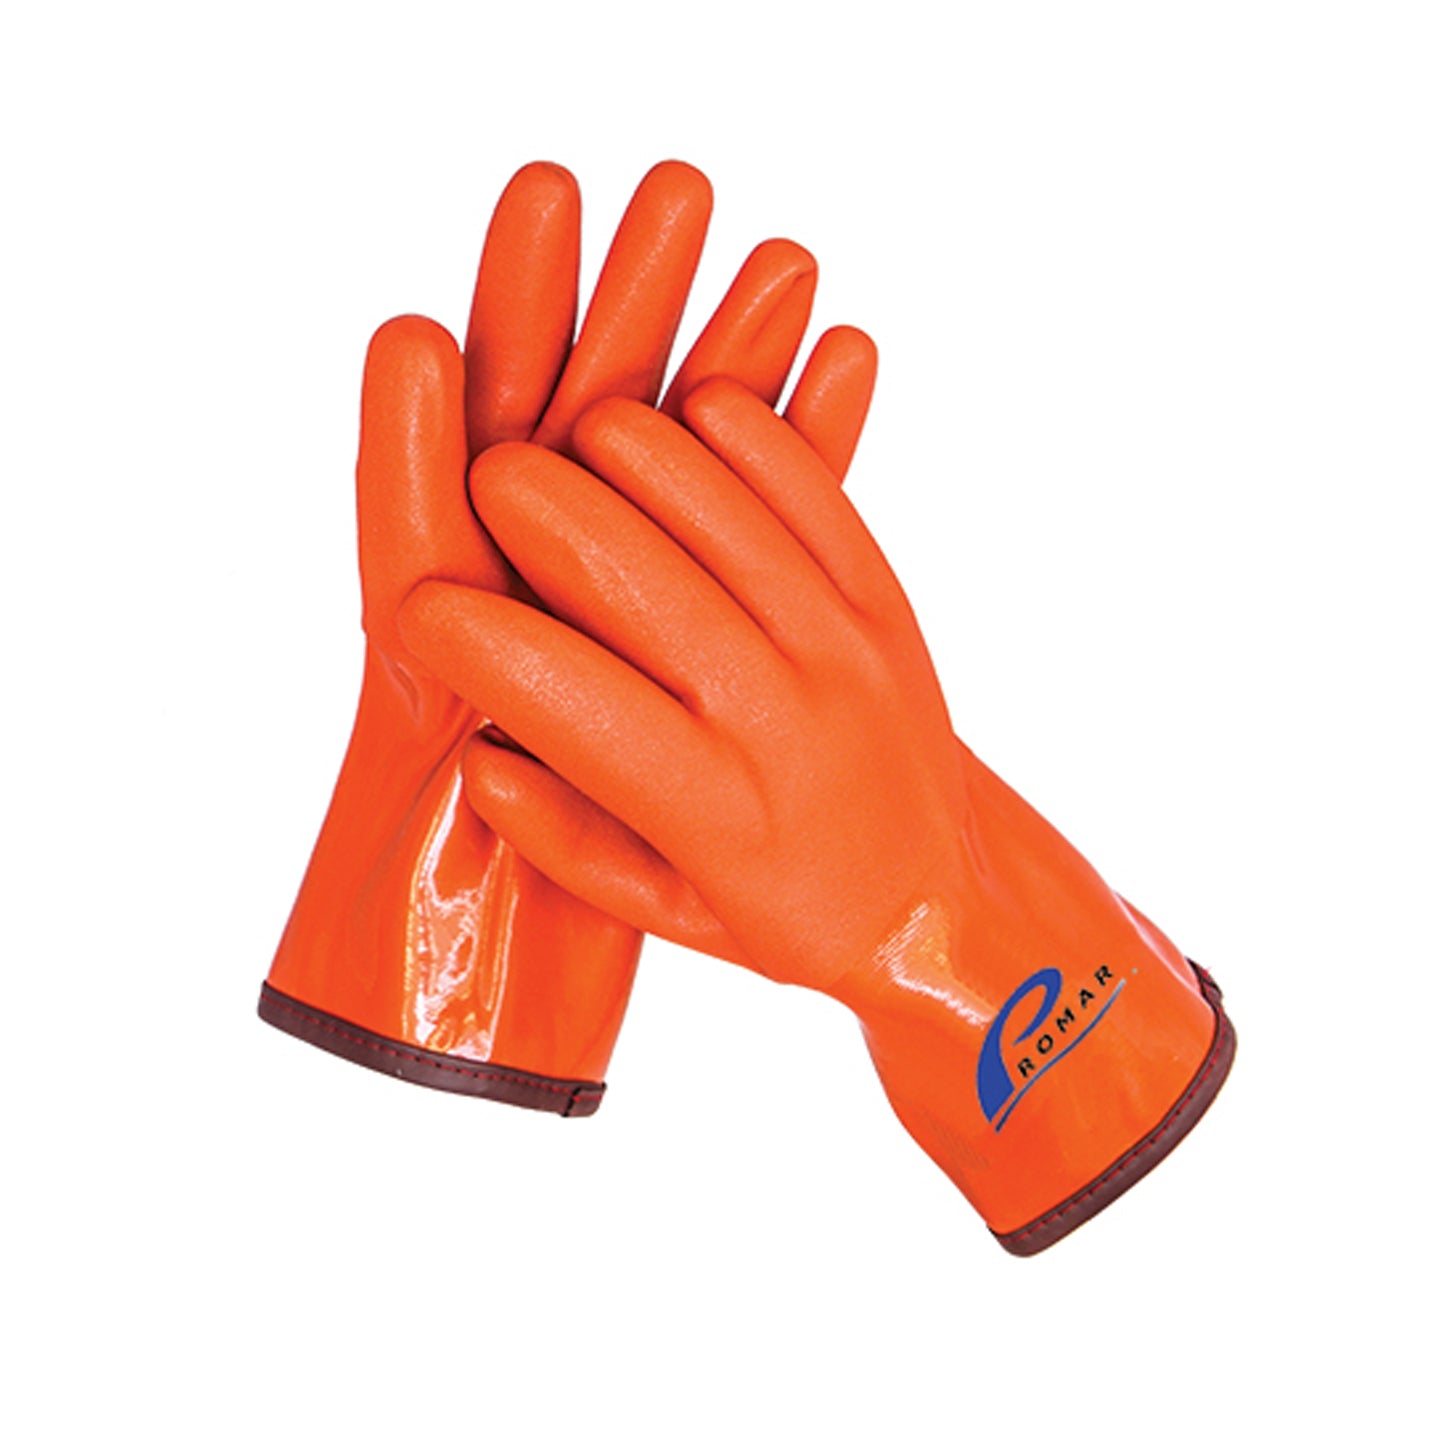 Promar GL-400 Insulated Progrip Gloves Blue